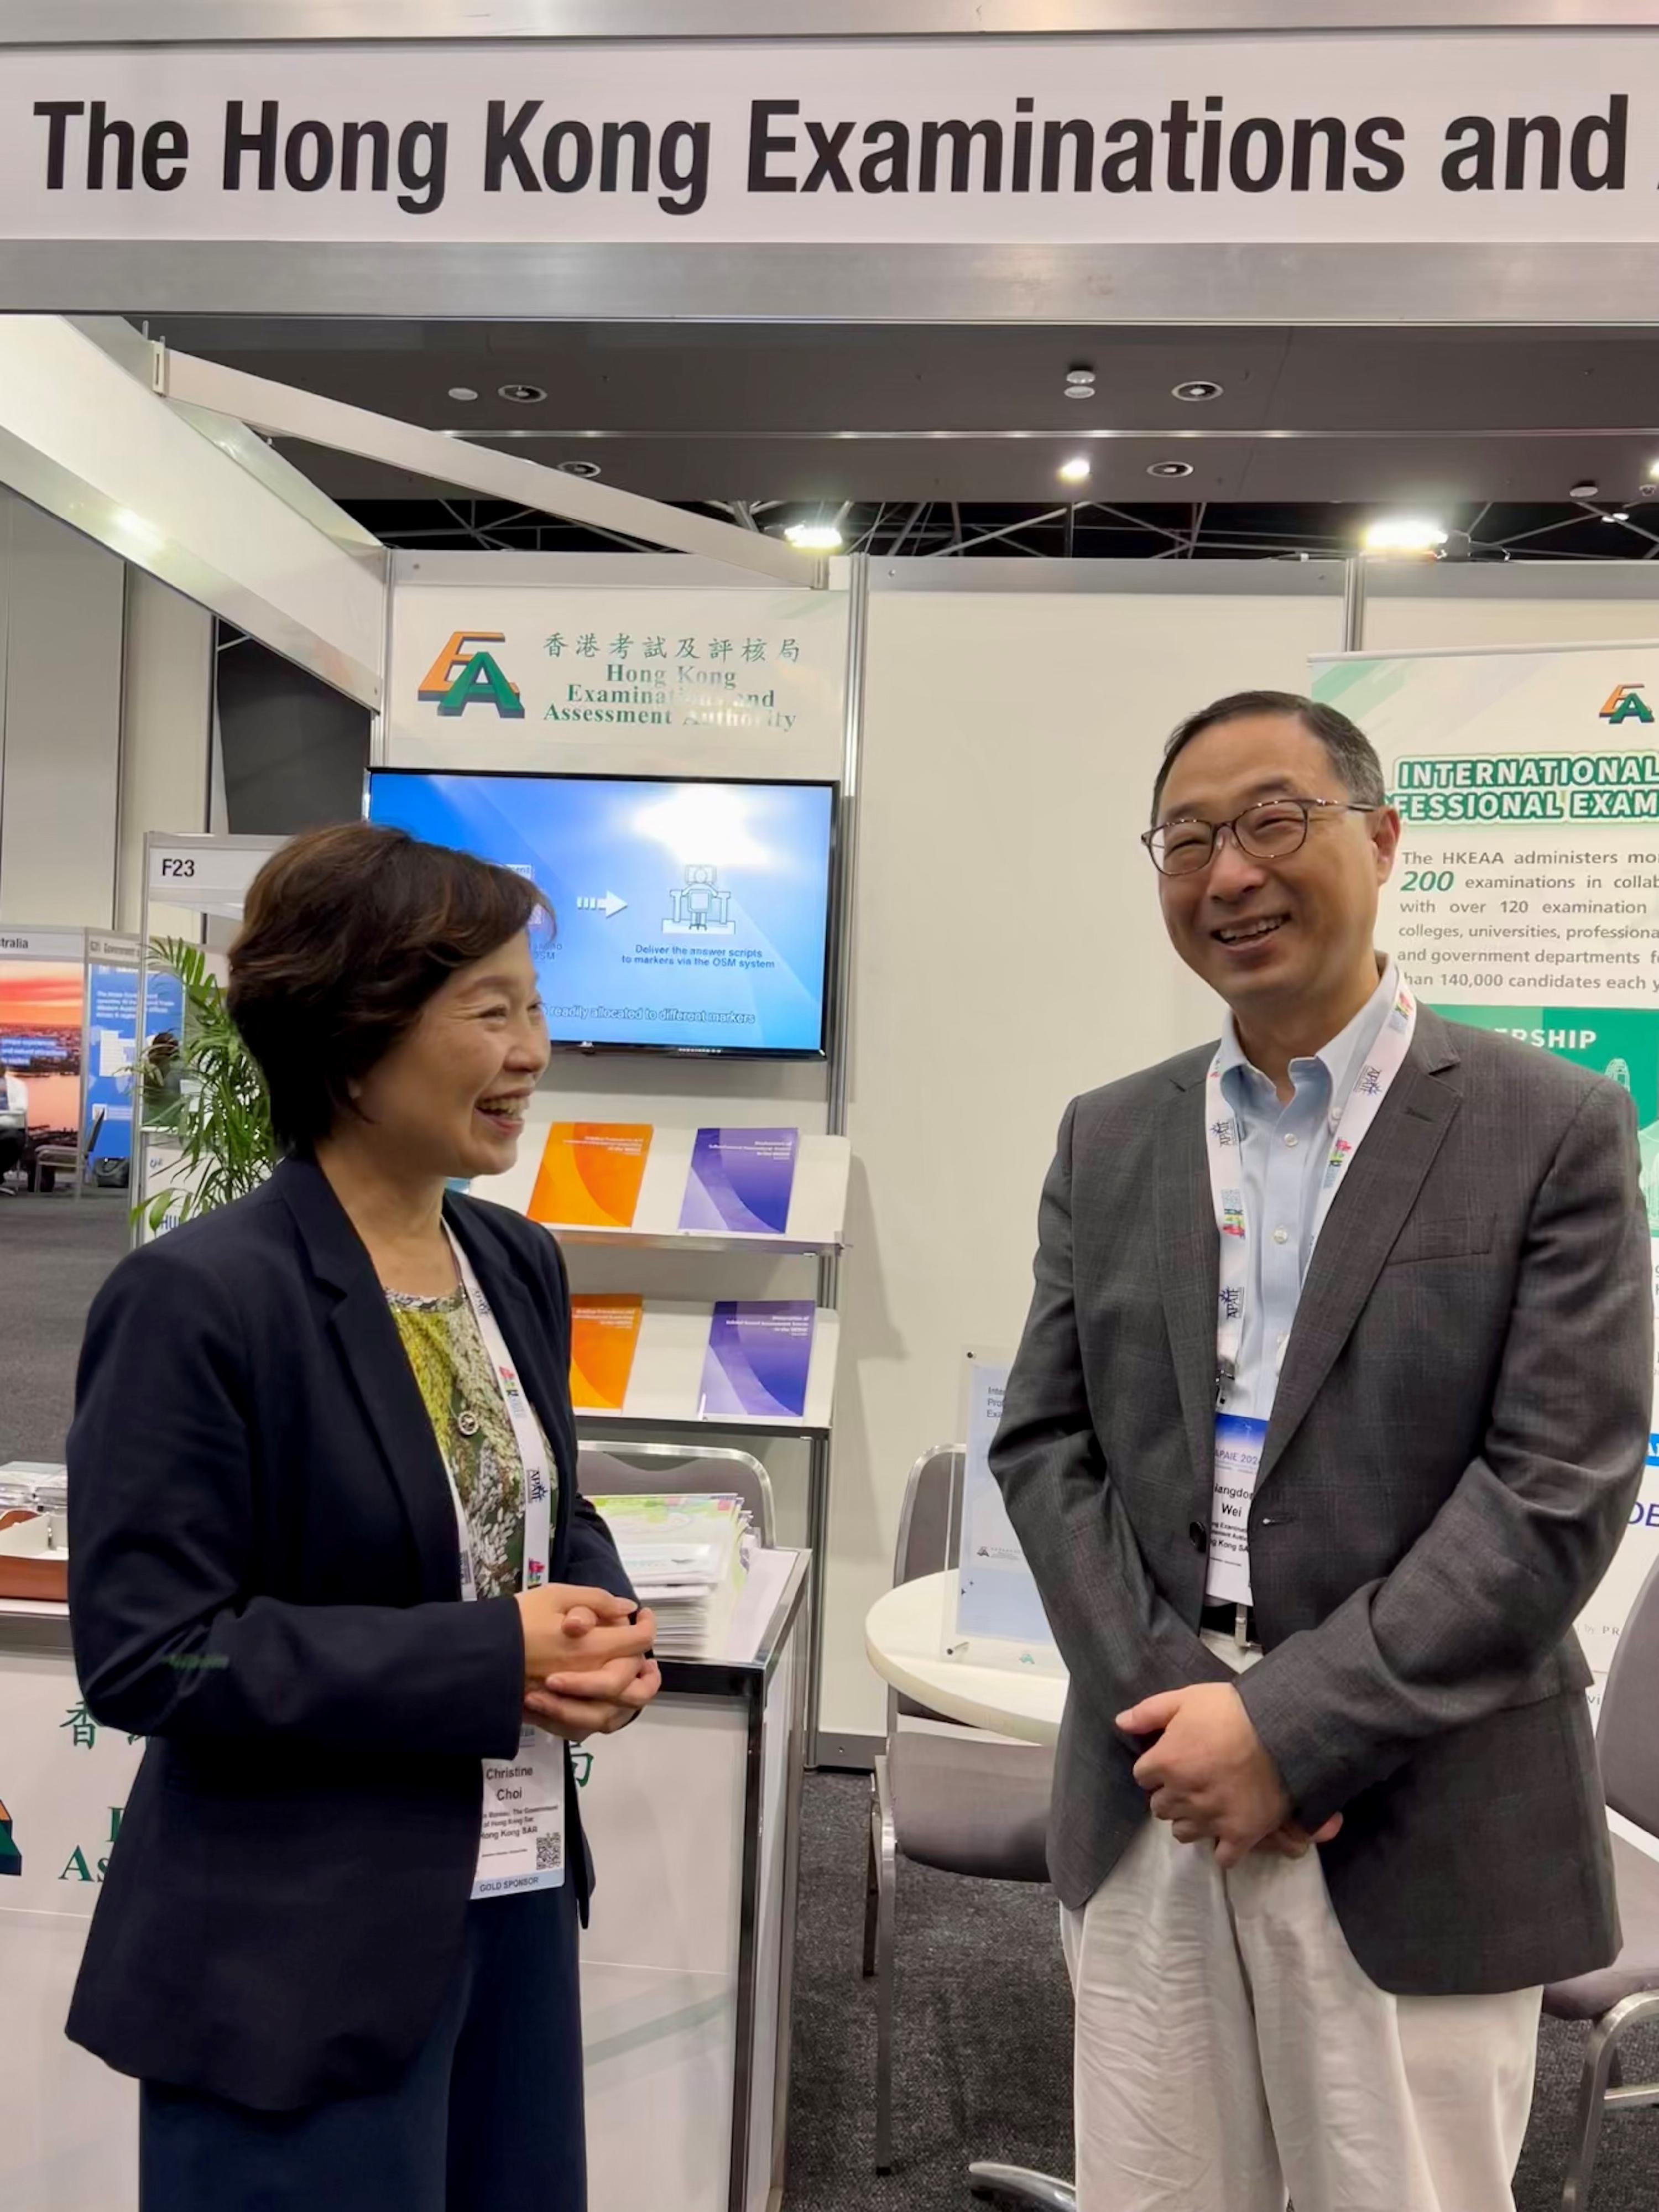 The Secretary for Education, Dr Choi Yuk-lin, visited the booth set up by the Hong Kong Examinations and Assessment Authority (HKEAA) at the Asia-Pacific Association for International Education 2024 Conference and Exhibition in Perth, Australia, today (March 6, Perth time). Photo shows Dr Choi (left) chatting with the Secretary General of the HKEAA, Professor Wei Xiangdong (right), to learn about the HKEAA’s promotion of the Hong Kong Diploma of Secondary Education Examination.